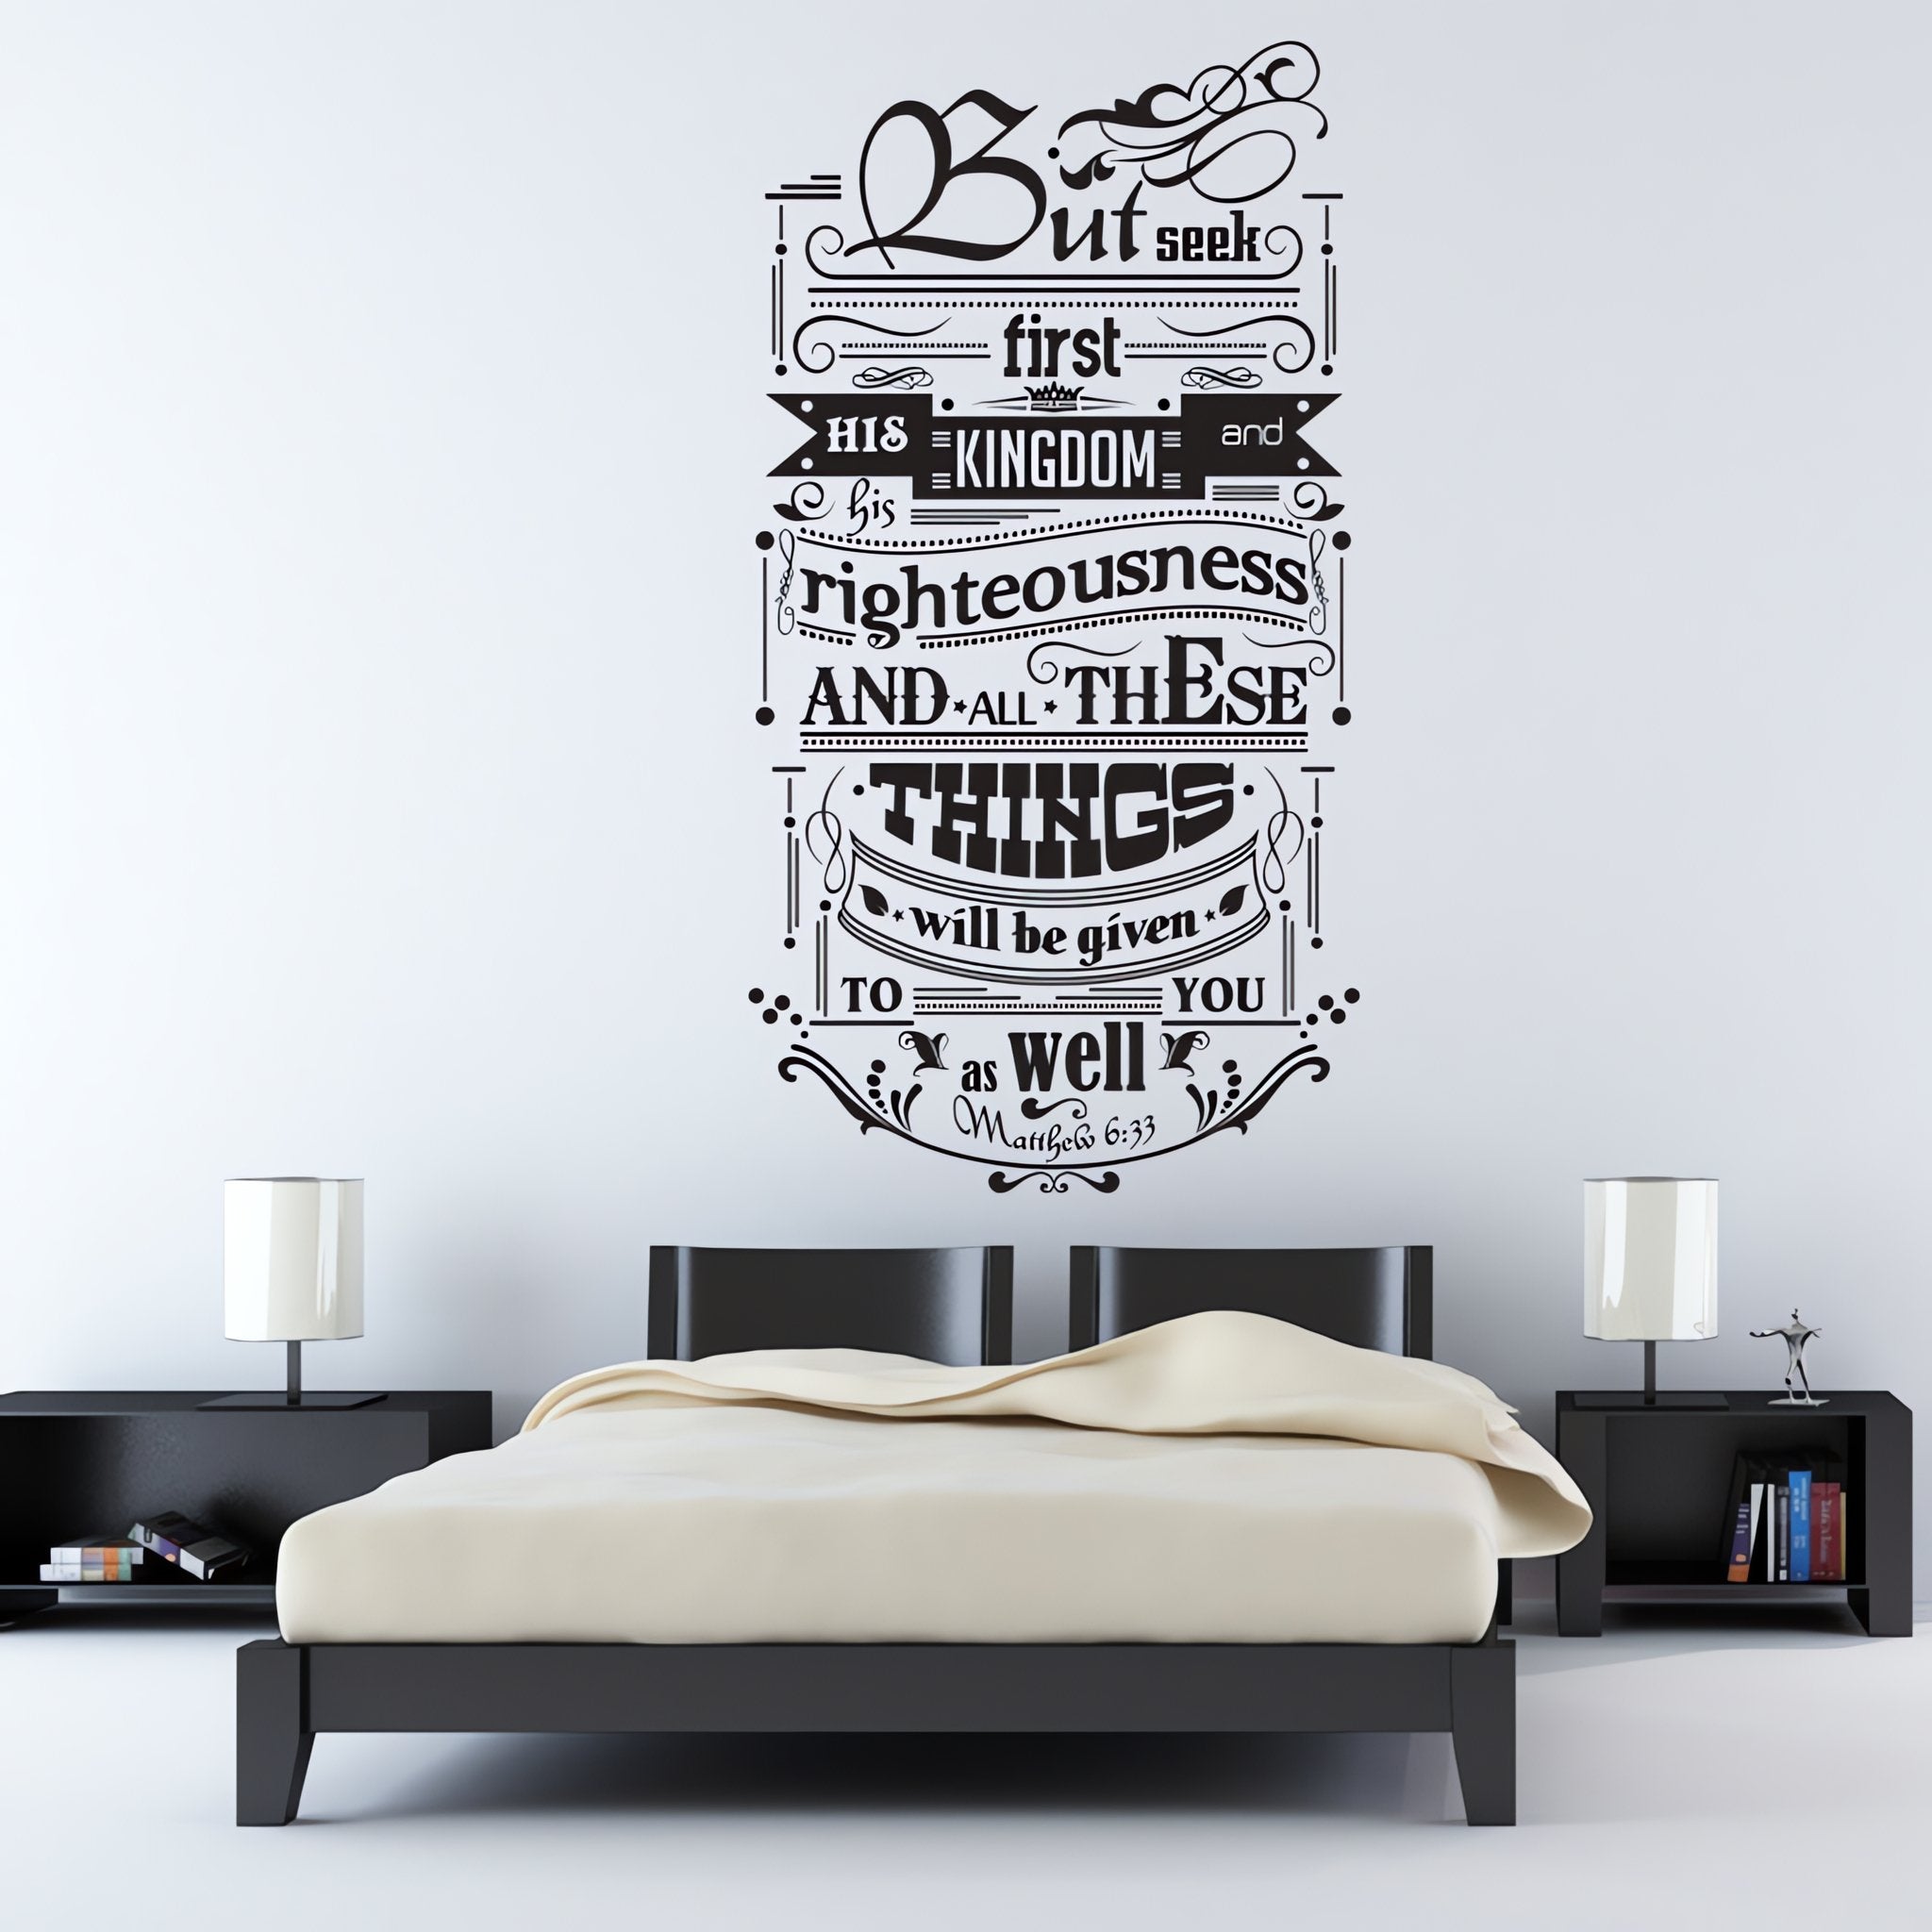 Wall quote sticker with text "But Seek First His Kingdom And His Righteousness And All These Things Will Be Given To You As Well" in an adult bedroom.